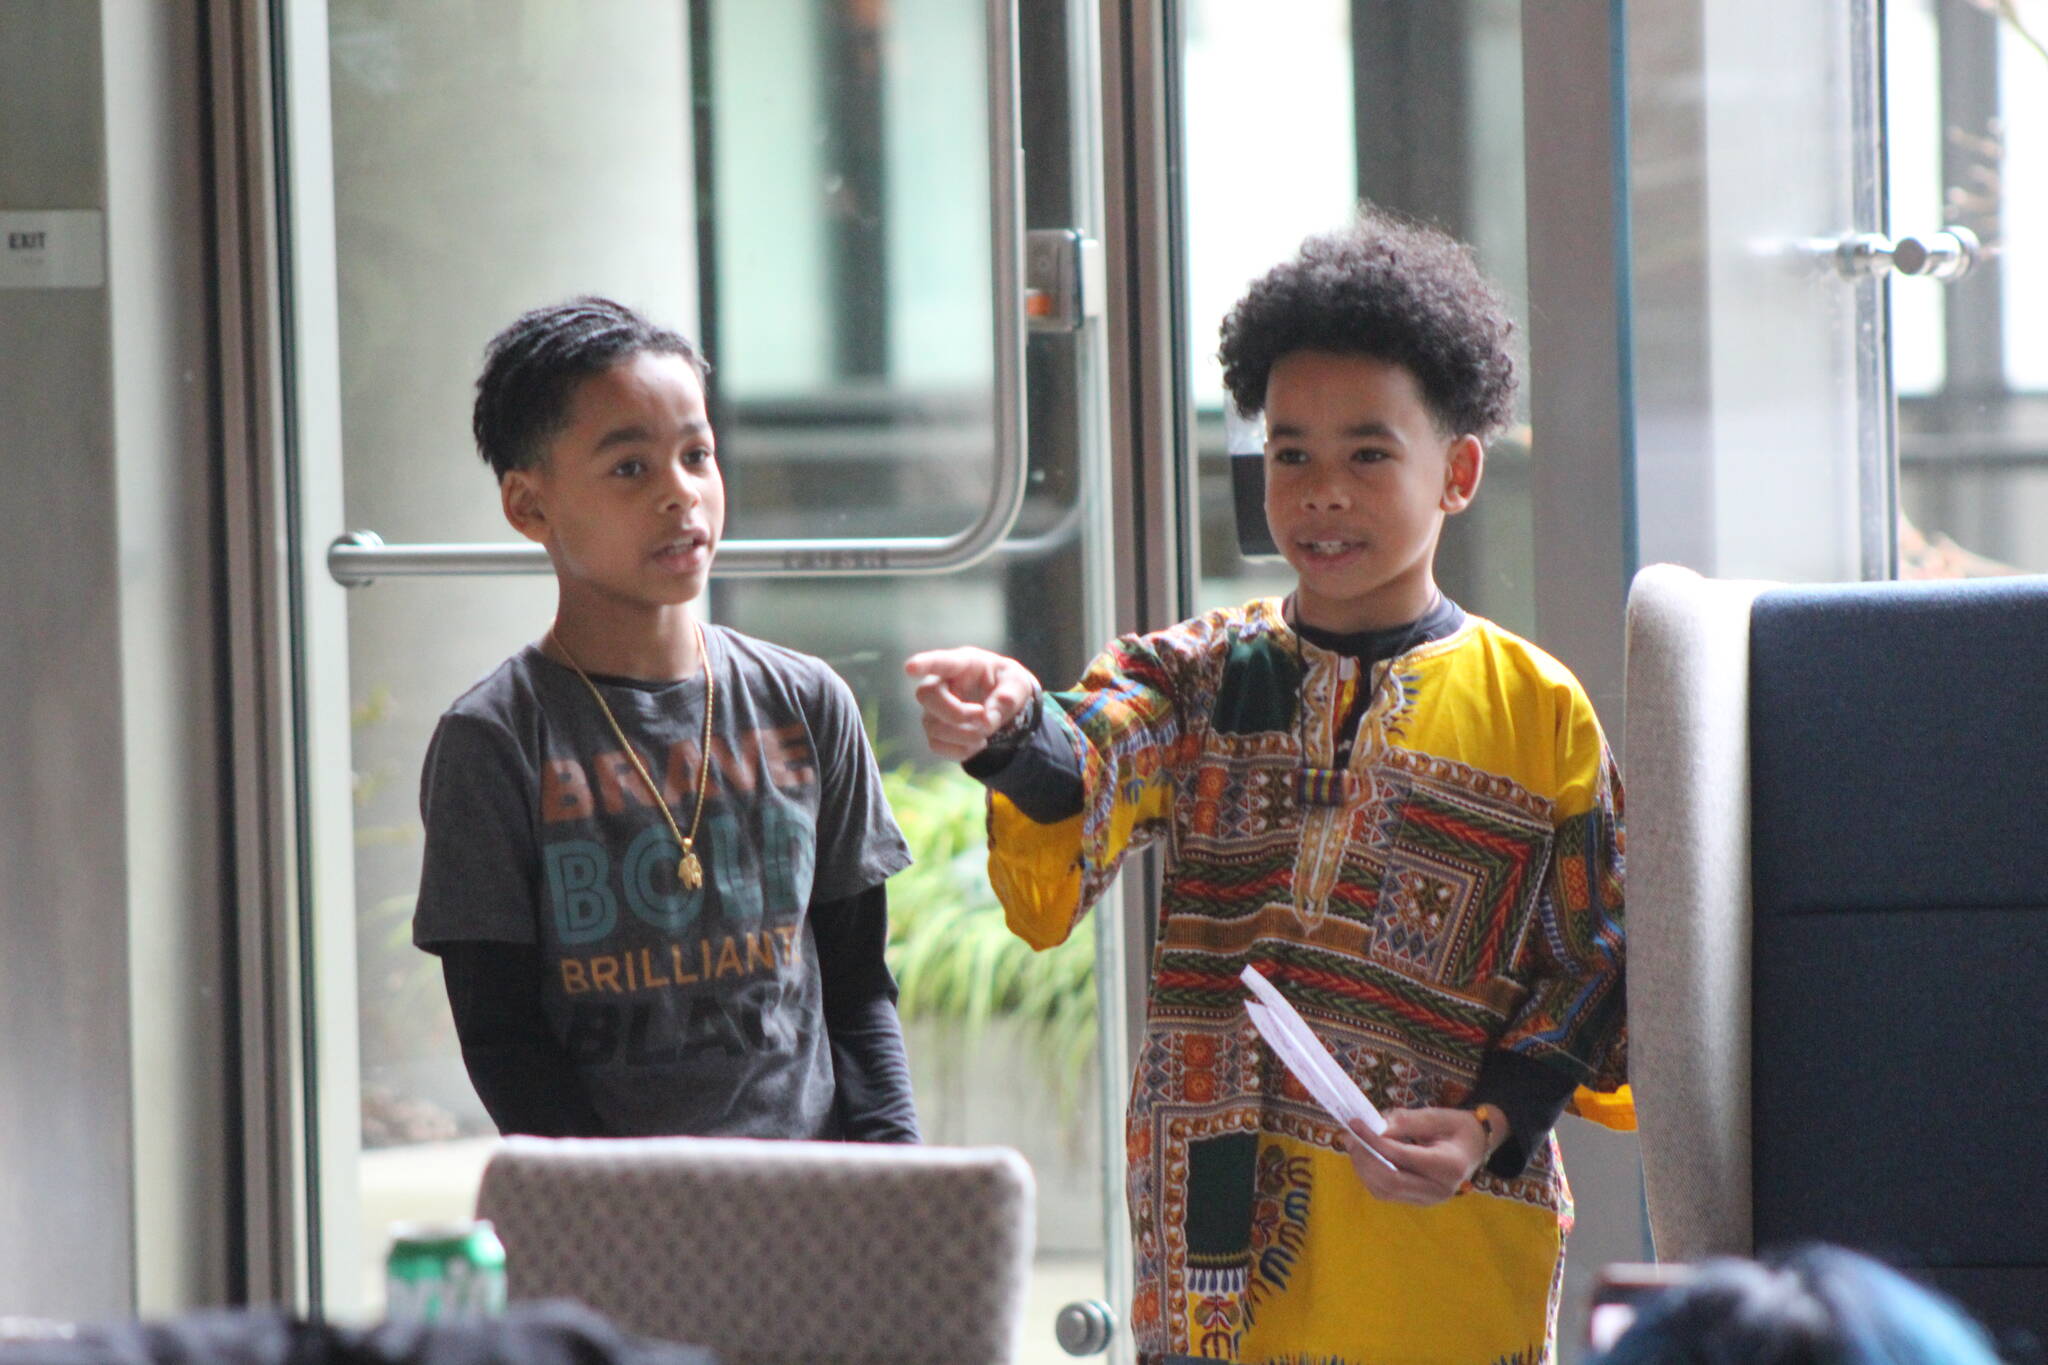 Photos by Bailey Jo Josie/Sound Publishing
Twin brothers Blaise (left) and Channing Gistarb, 9, of Sartori Elementary School recite the poem “Hey, Black Child” by Useni Eugene Perkins.